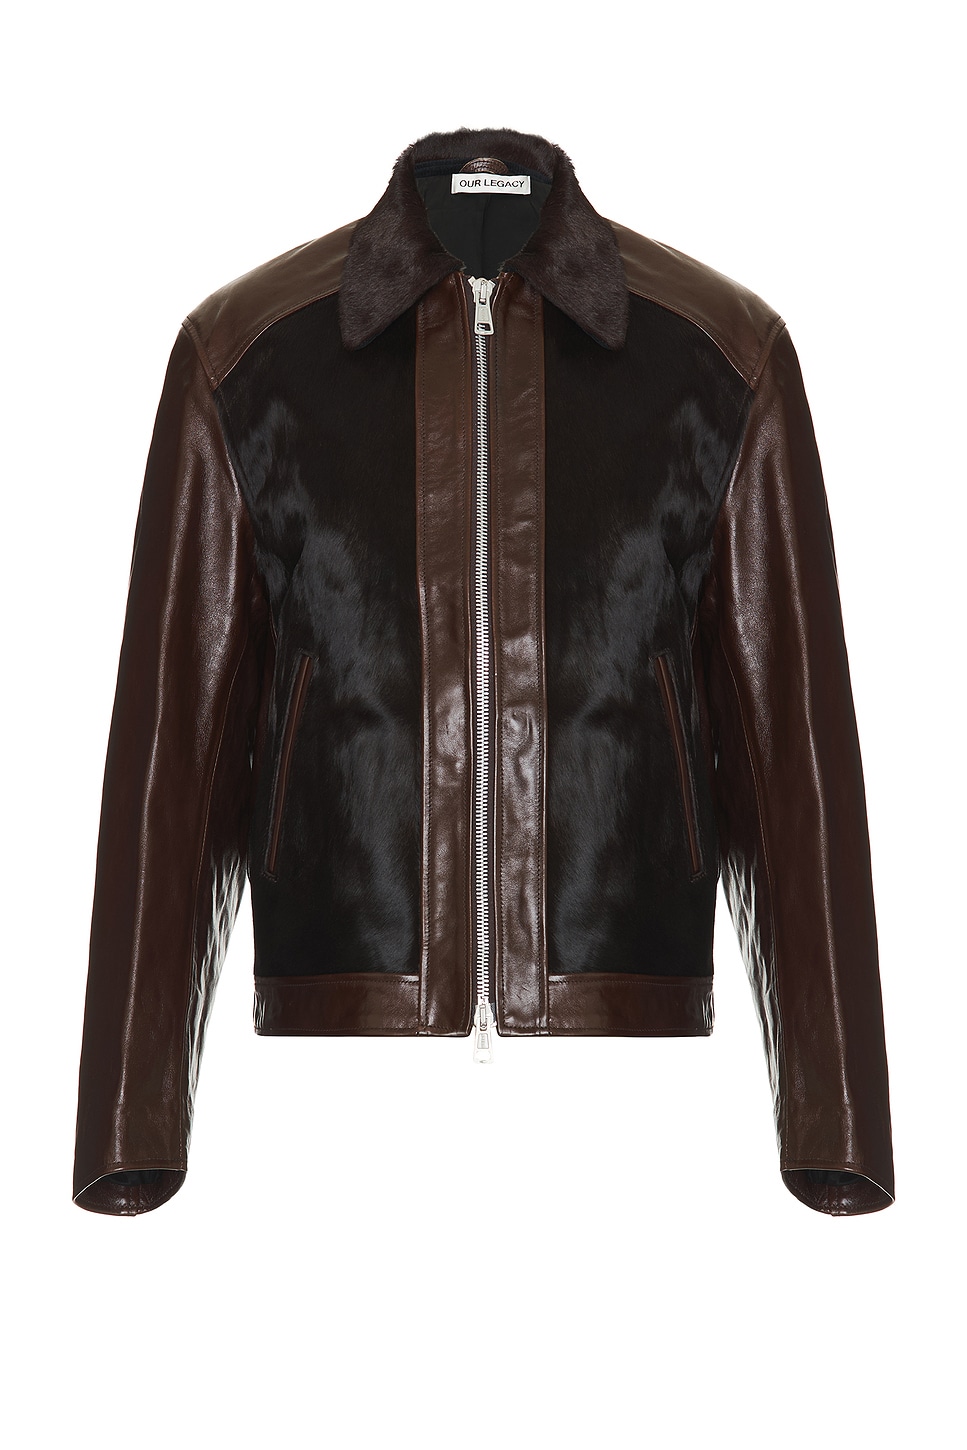 Image 1 of Our Legacy Andalou Jacket in Tuscan Brown Hair On Hide